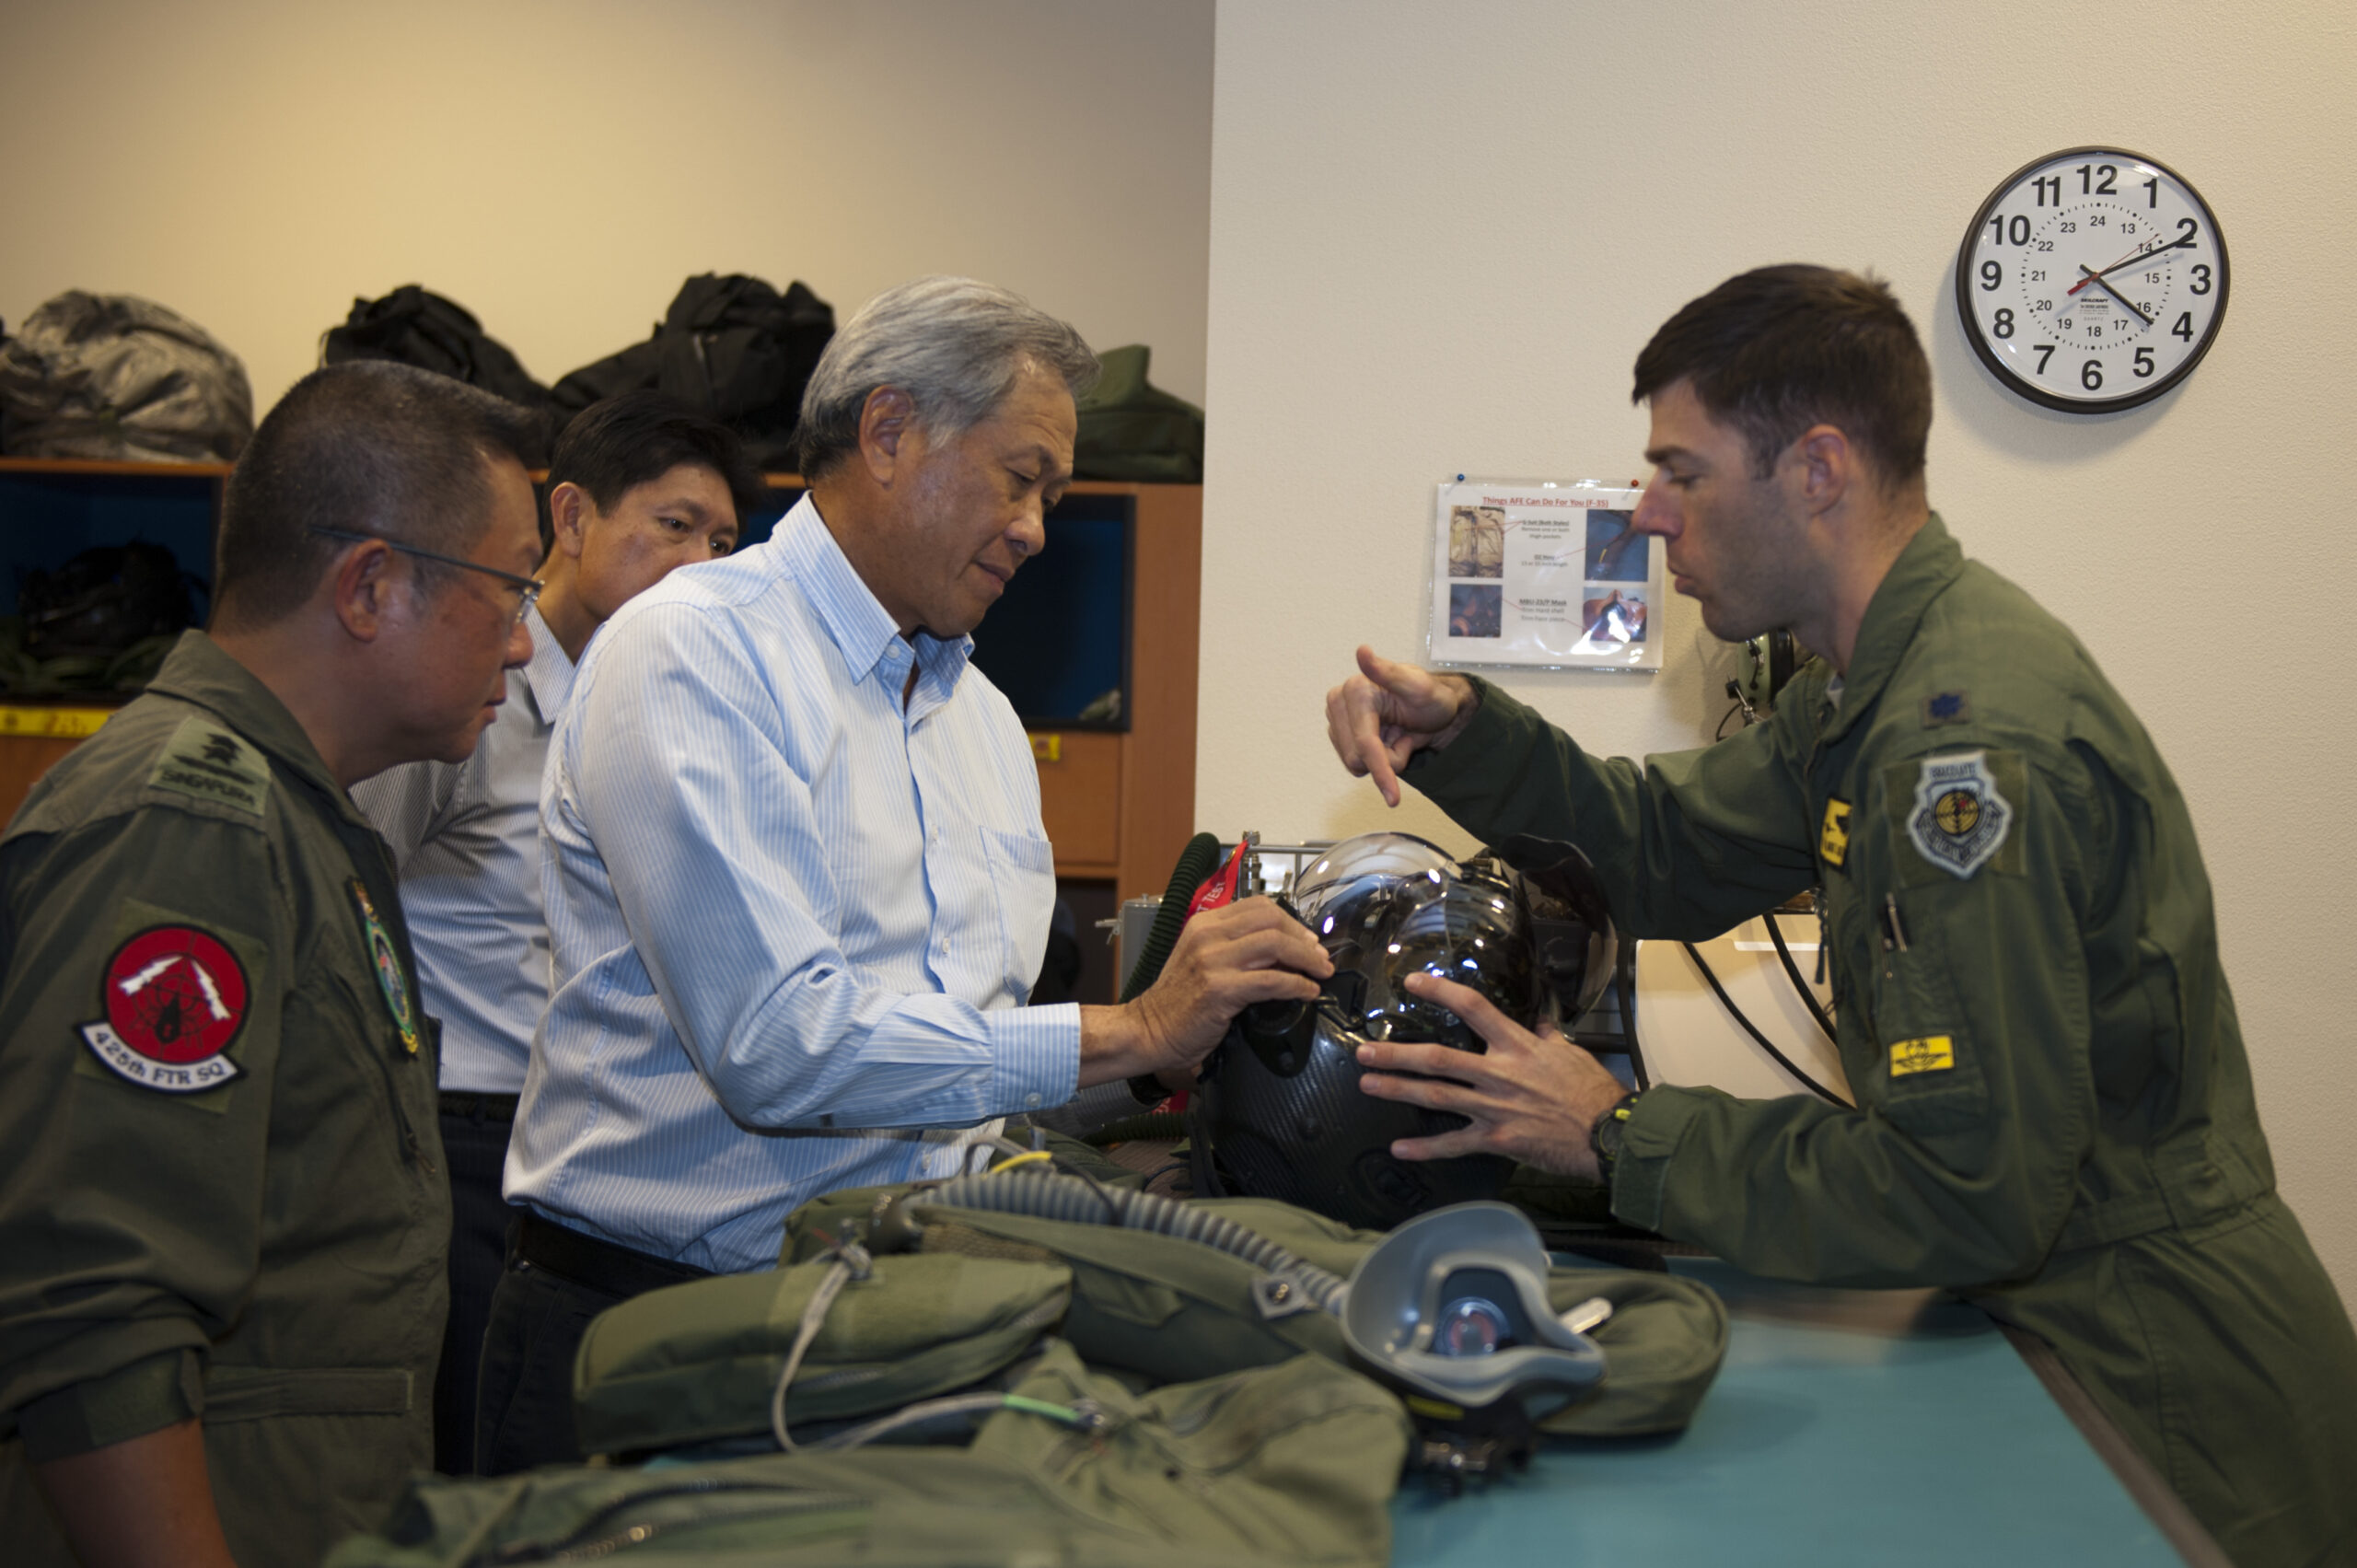 Singaporean Minister of Defense Dr. Ng Eng Hen learns about the F-35 helmet-mounted display system during a visit to the 61st Fighter Squadron at Luke Air Force Base, Arizona, December 10, 2015. <em>U.S. Air Force photo by Staff Sgt. Staci Miller</em><br><a href="https://www.luke.af.mil/News/Article-Display/Article/640795/rsaf-hone-combat-skills-during-forging-sabre-exercise/undefined"></a>